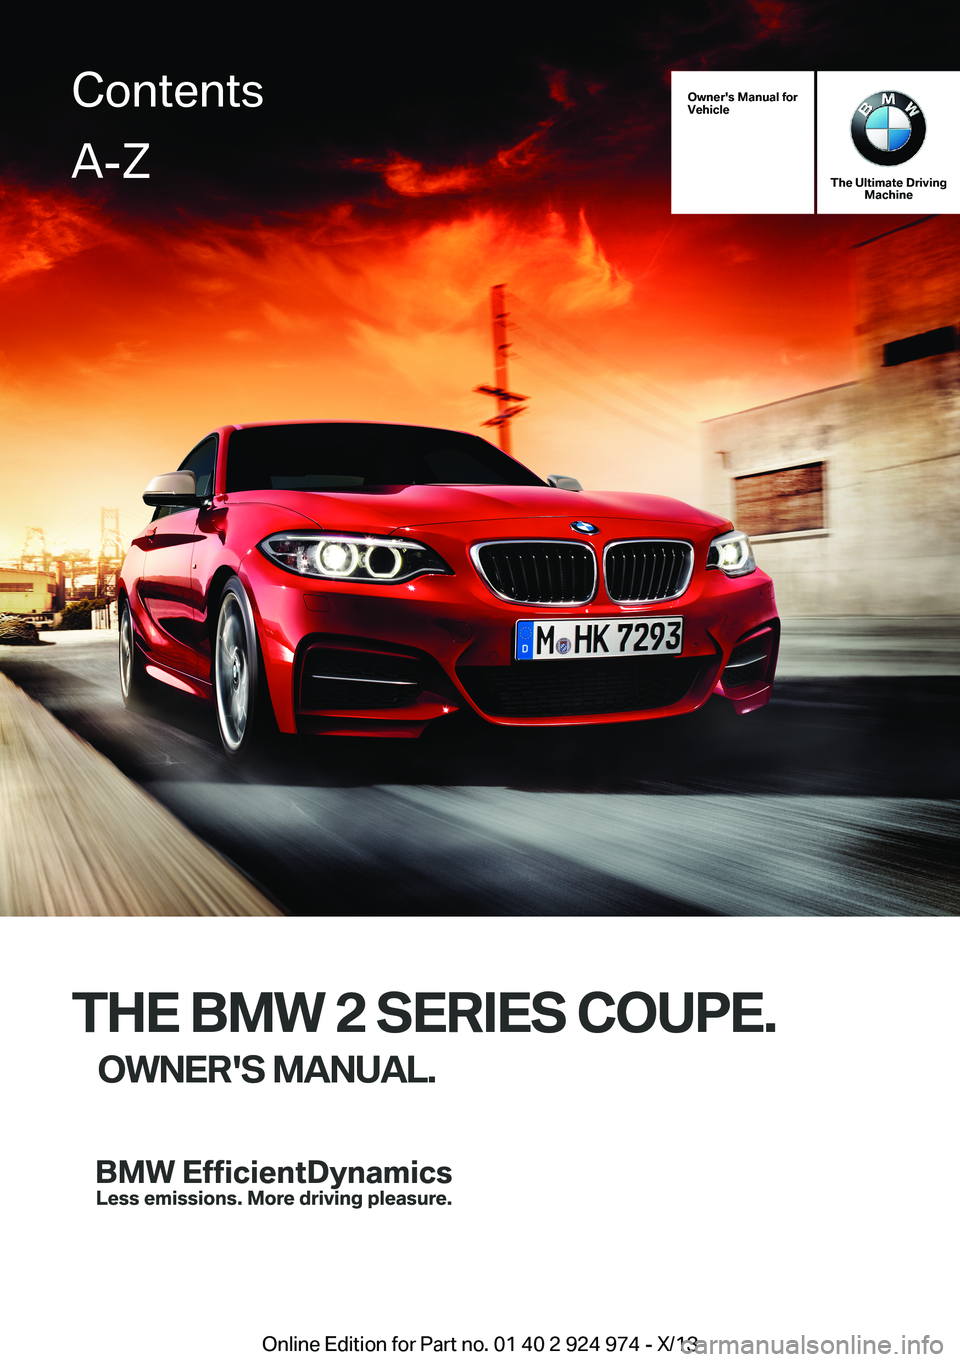 BMW 228ICOUPE 2014  Owners Manual Owner's Manual forVehicle
The Ultimate DrivingMachine
THE BMW 2 SERIES COUPE.
OWNER'S MANUAL.ContentsA-Z
Online Edition for Part no. 01 40 2 924 974 - X/13   